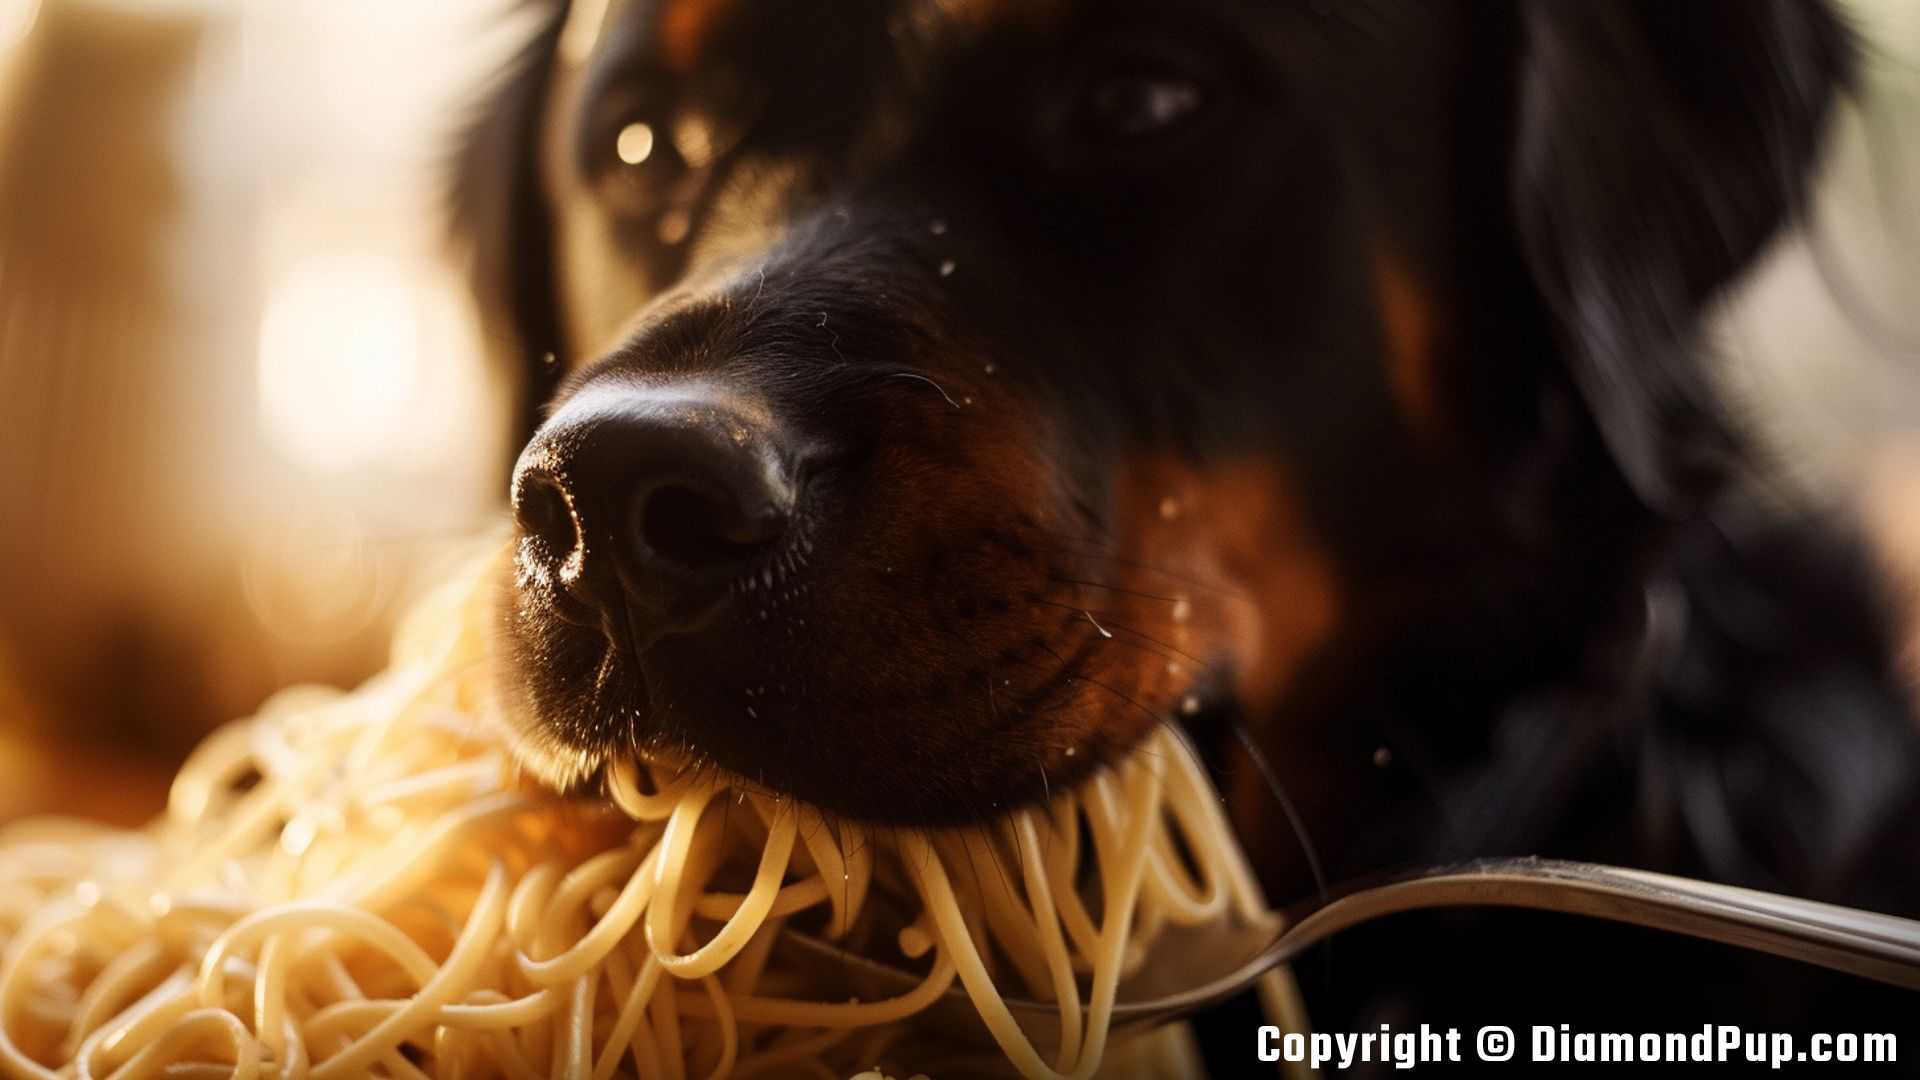 Image of a Playful Rottweiler Snacking on Pasta